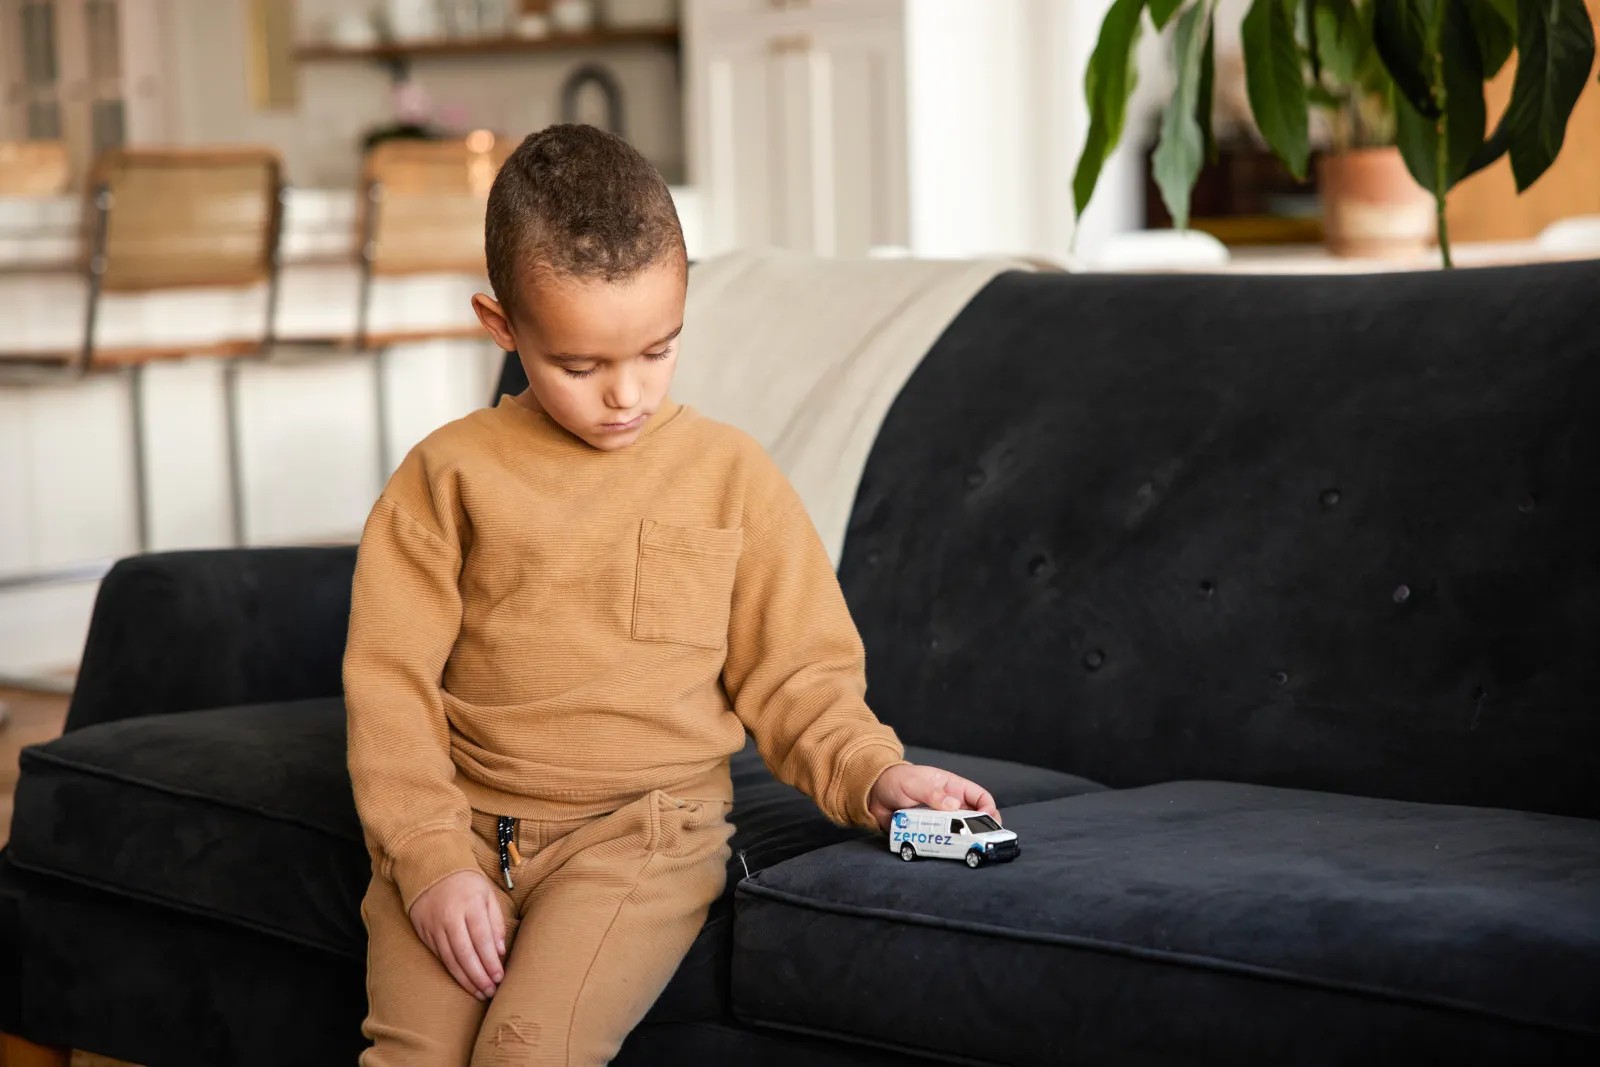 little boy in tan sweatsuit playing with a toy Zerorez van on a dirty suede couch that need professional suede cleaning